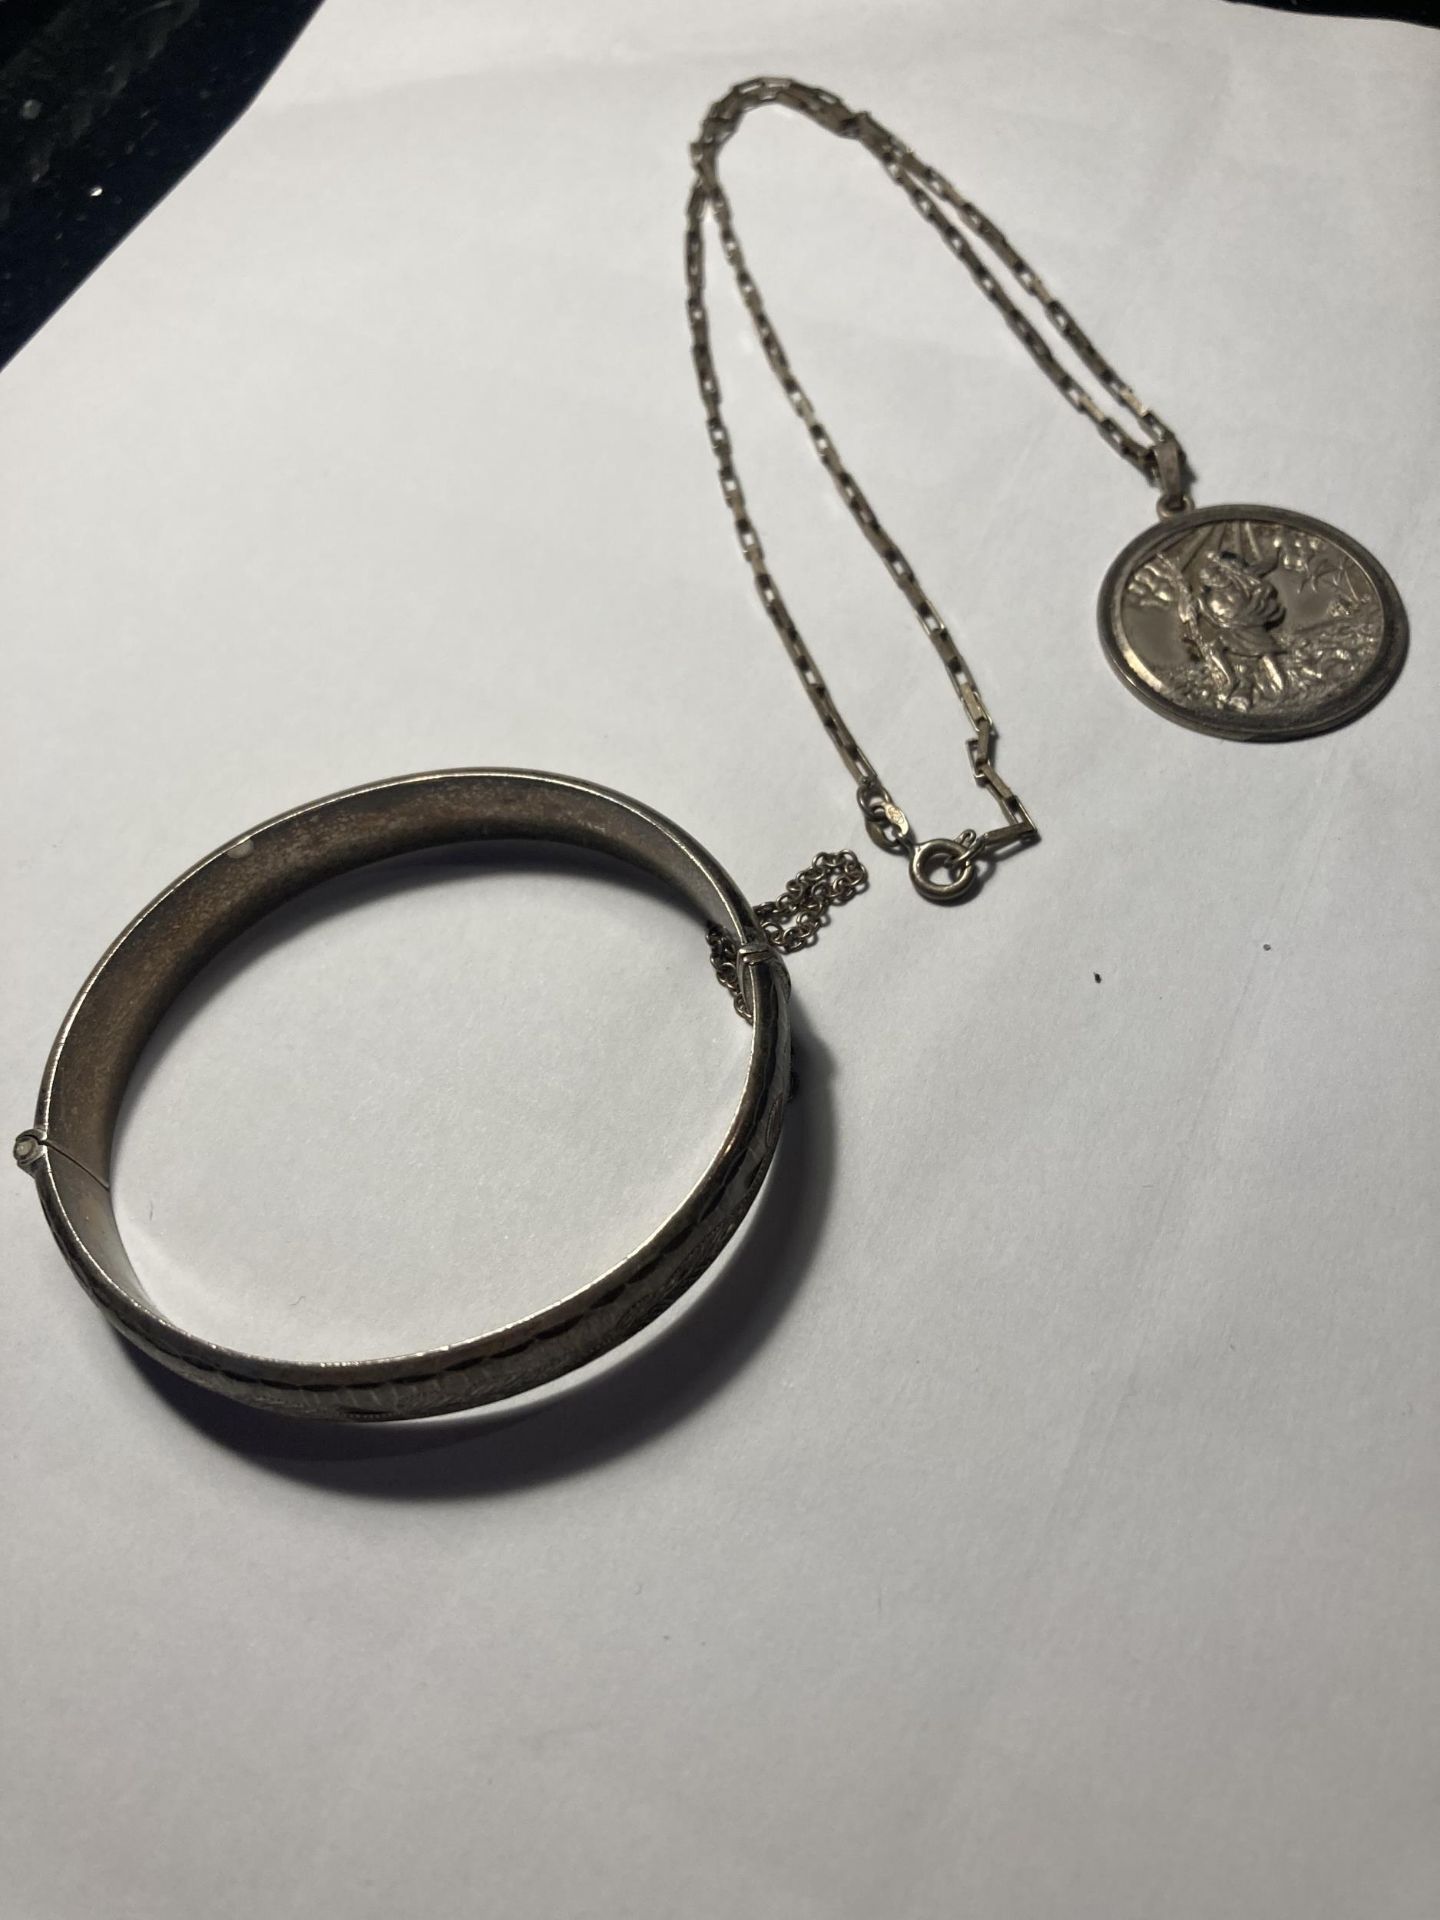 TWO MARKED SILVER ITEMS TO INCLUDE A BANGLE WITH SAFETY CHAIN AND A NECKLACE WITH ST CHRISTOPHER